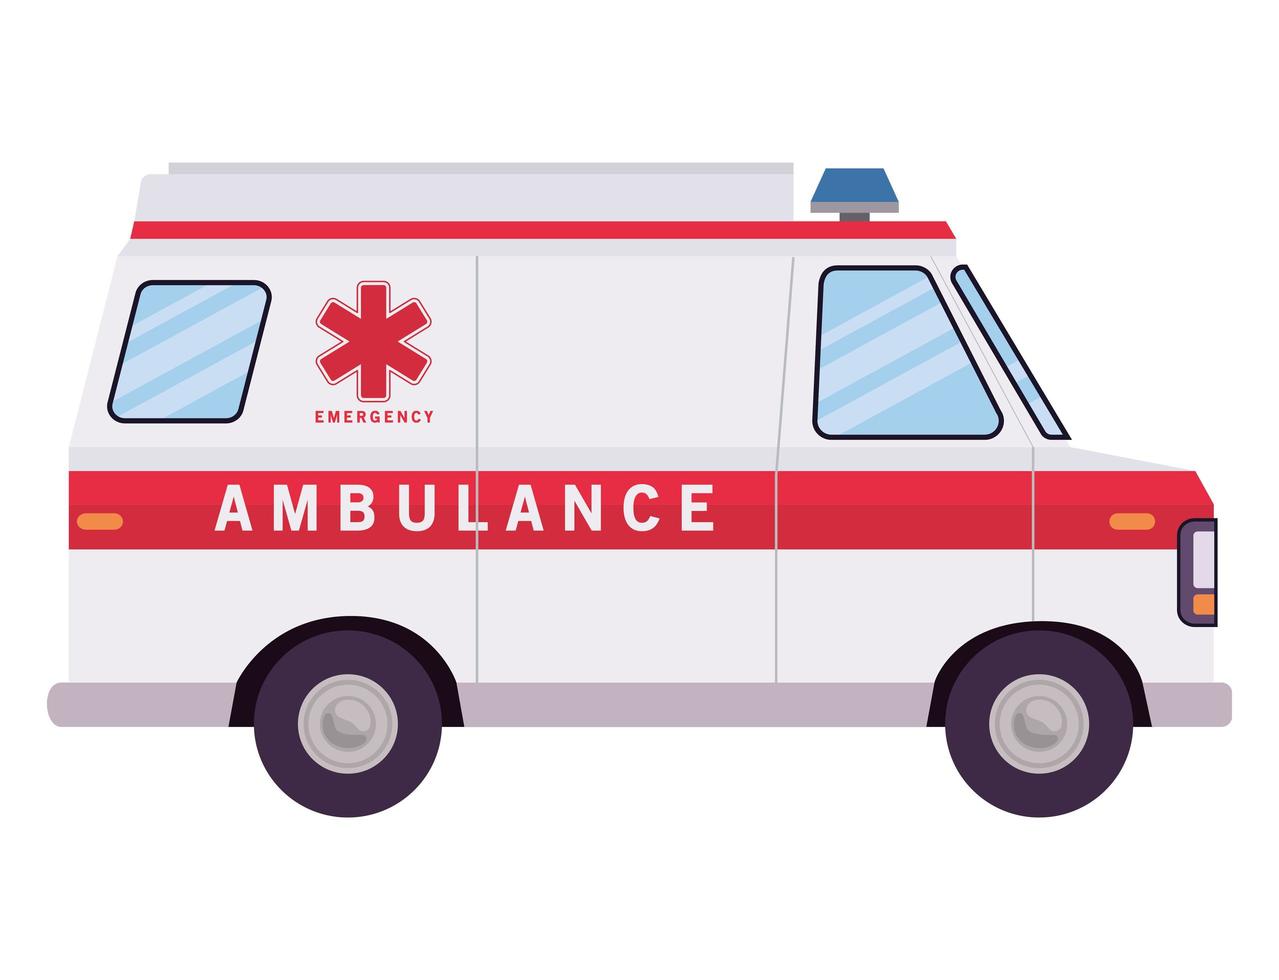 https://static.vecteezy.com/system/resources/previews/001/818/427/non_2x/ambulance-paramedic-car-side-view-design-free-vector.jpg